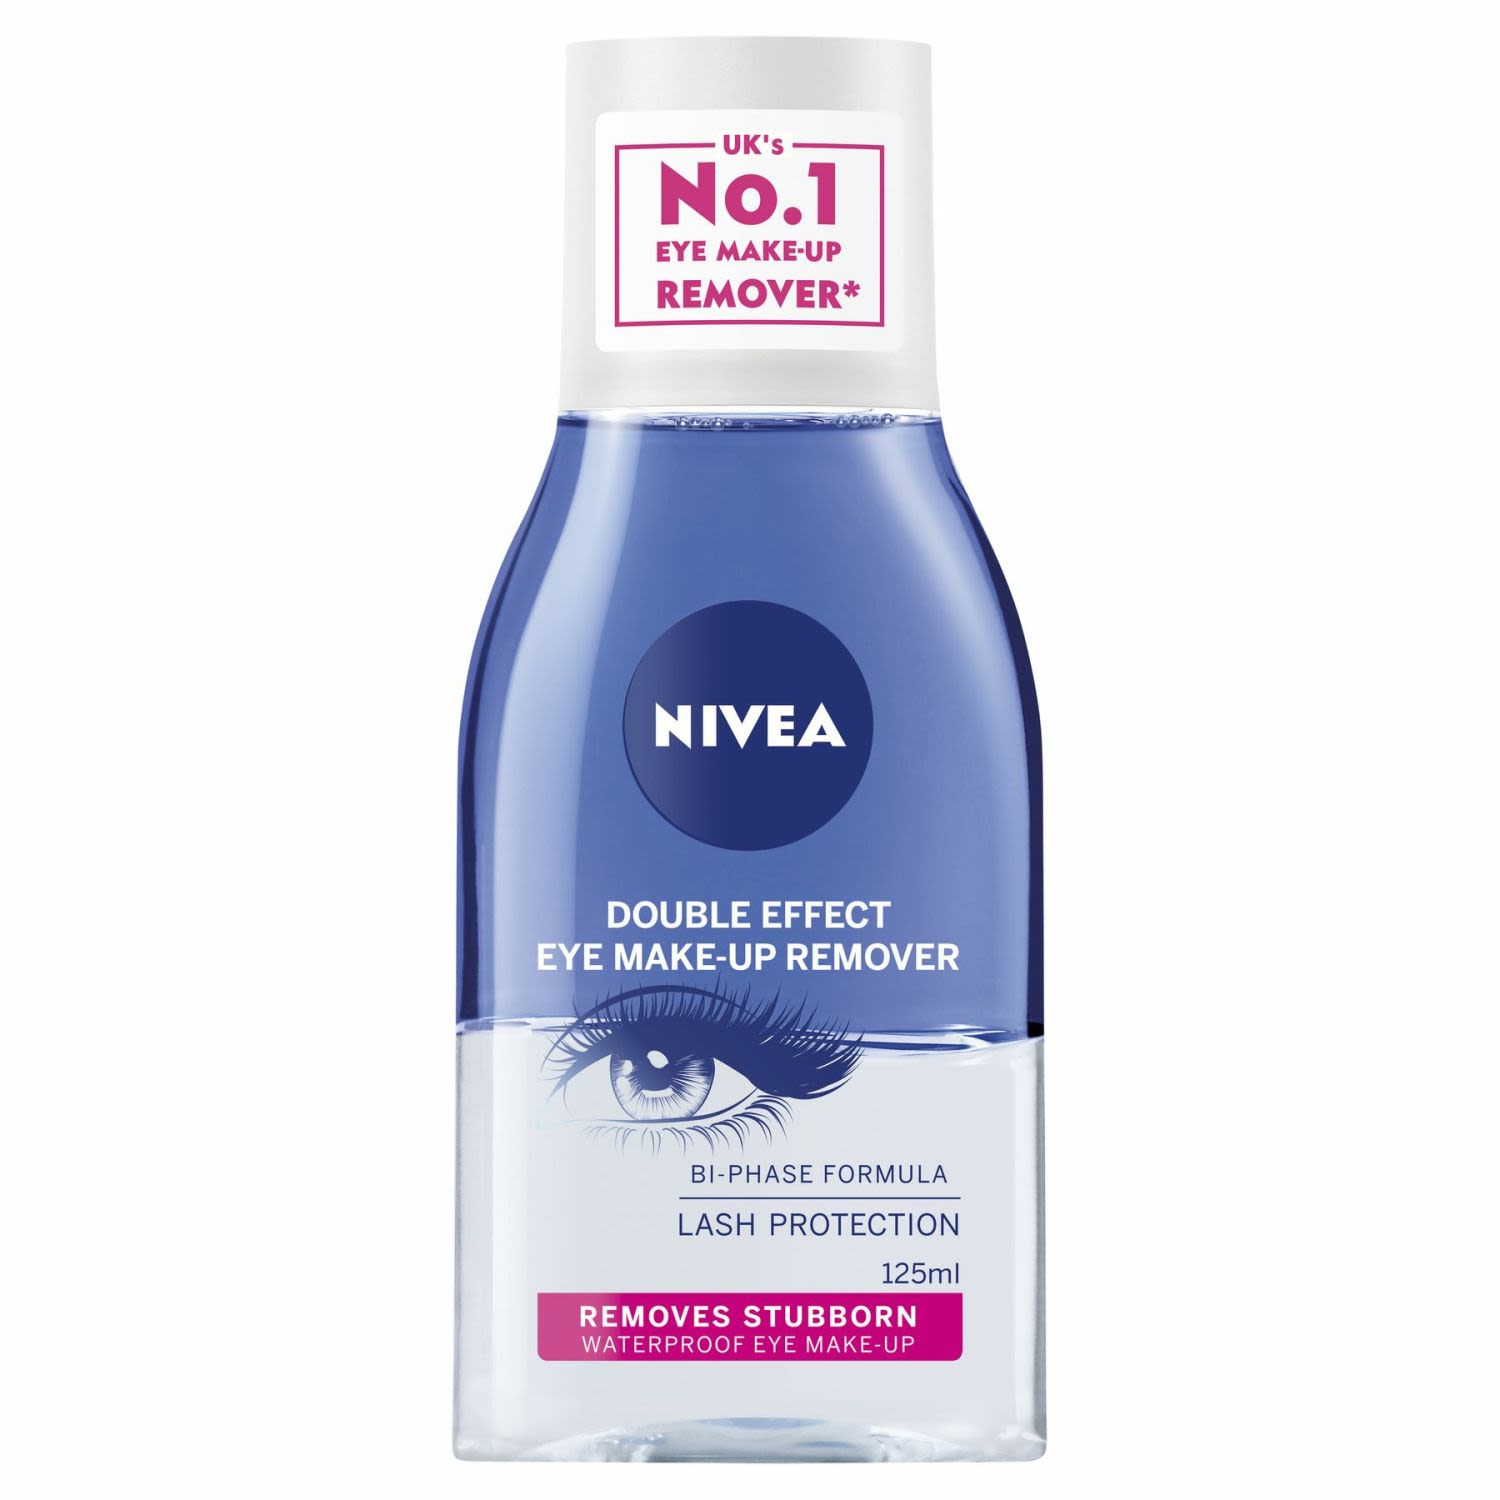 NIVEA Double Effect Eye Make-up Remover removes extreme waterproof eye make-up and mascara. The sensitive eye area is efficiently yet gently cleansed to protect the eyelashes. The caring bi-phase formula with Cornflower Extract means that no rubbing is needed. The product does not leave any unpleasant greasy residue. Skin compatibility dermatologically and ophthalmologically approved.
<br /> <br />